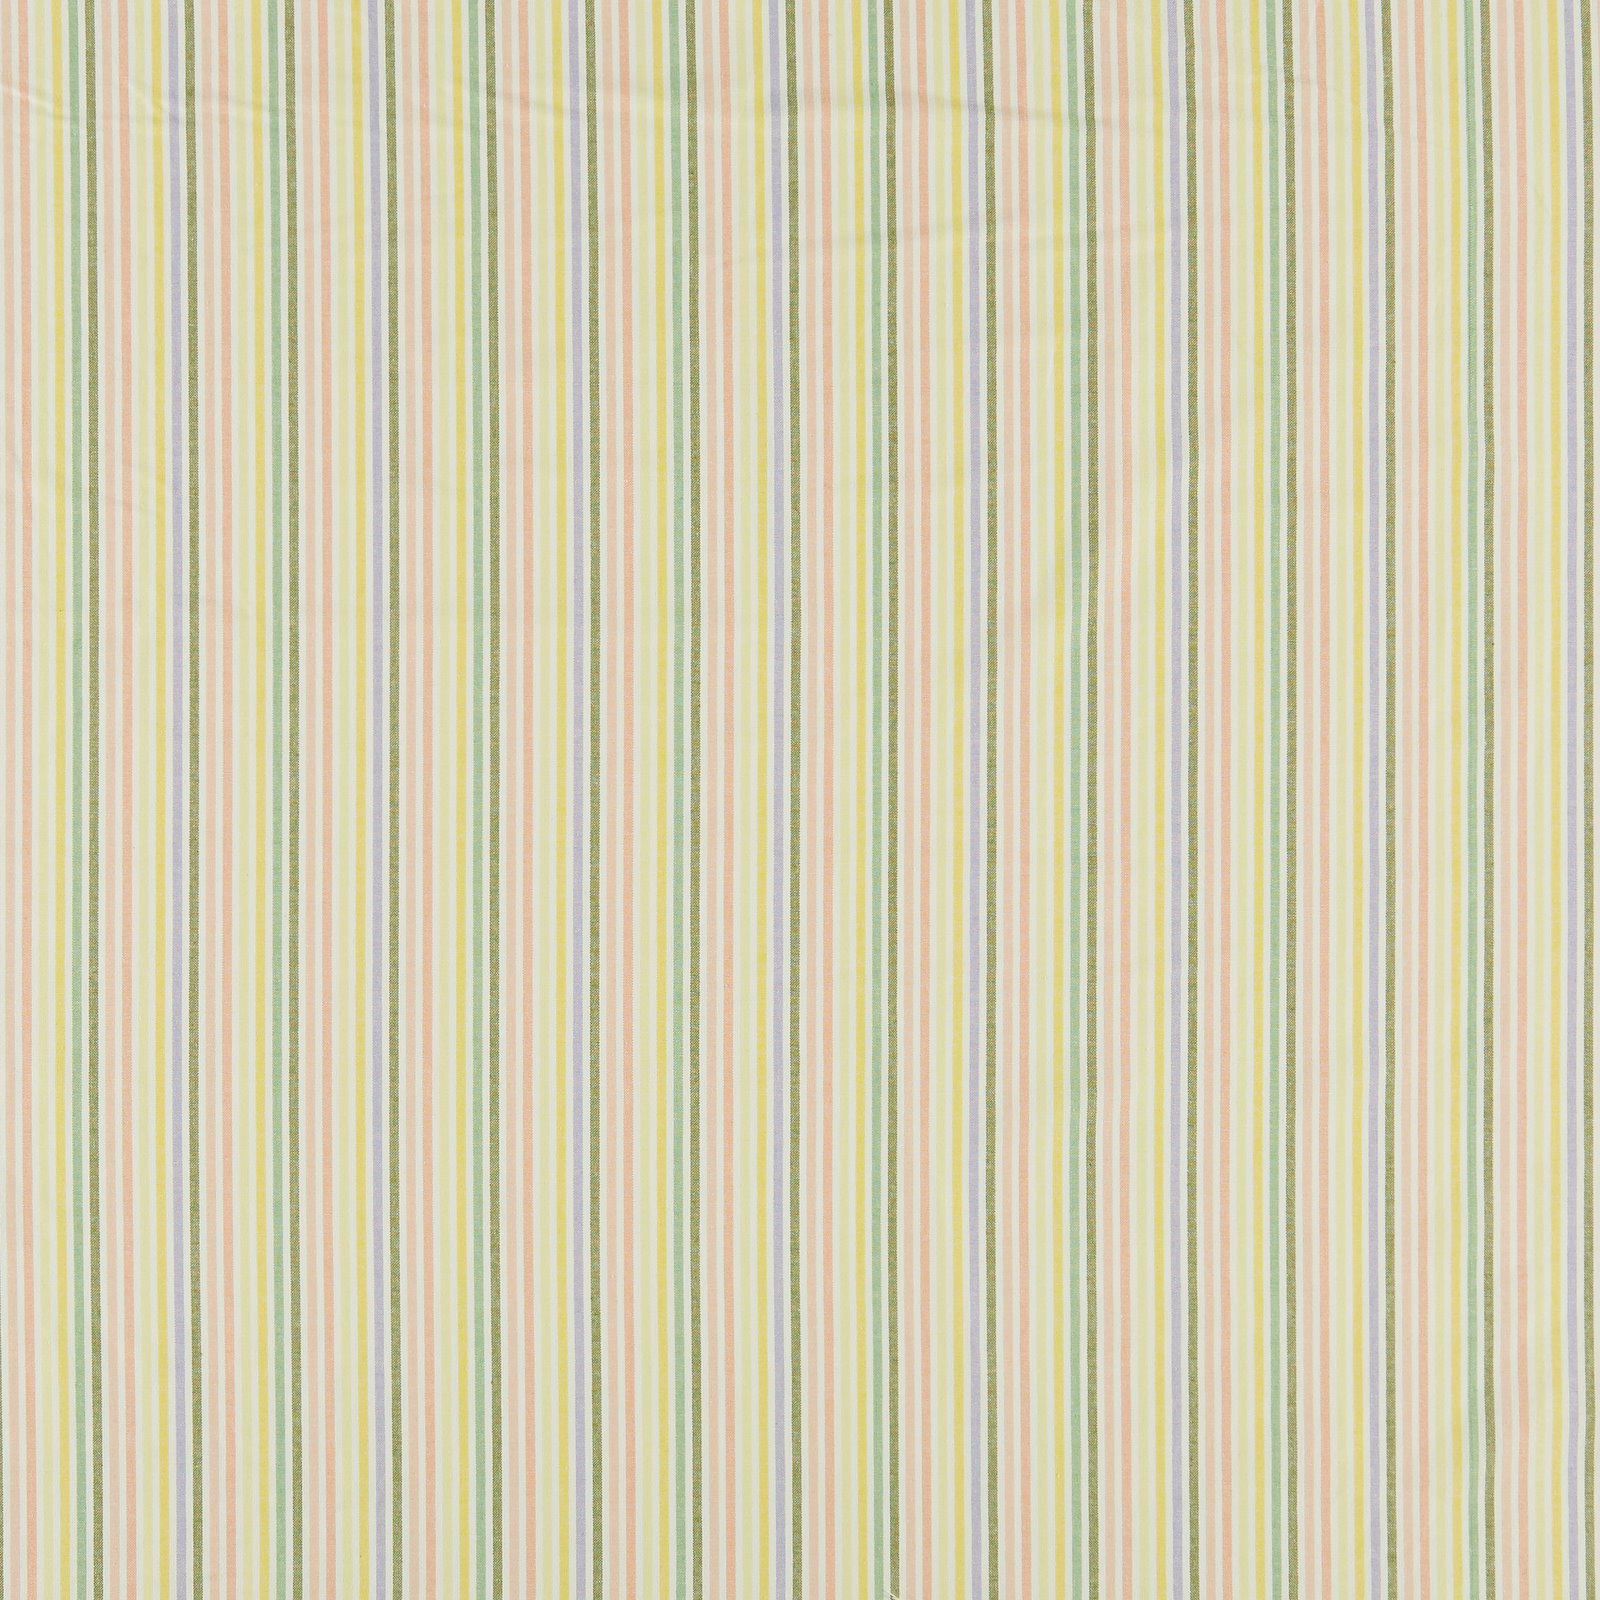 Woven cotton w multicolored YD stripes 816304_pack_lp